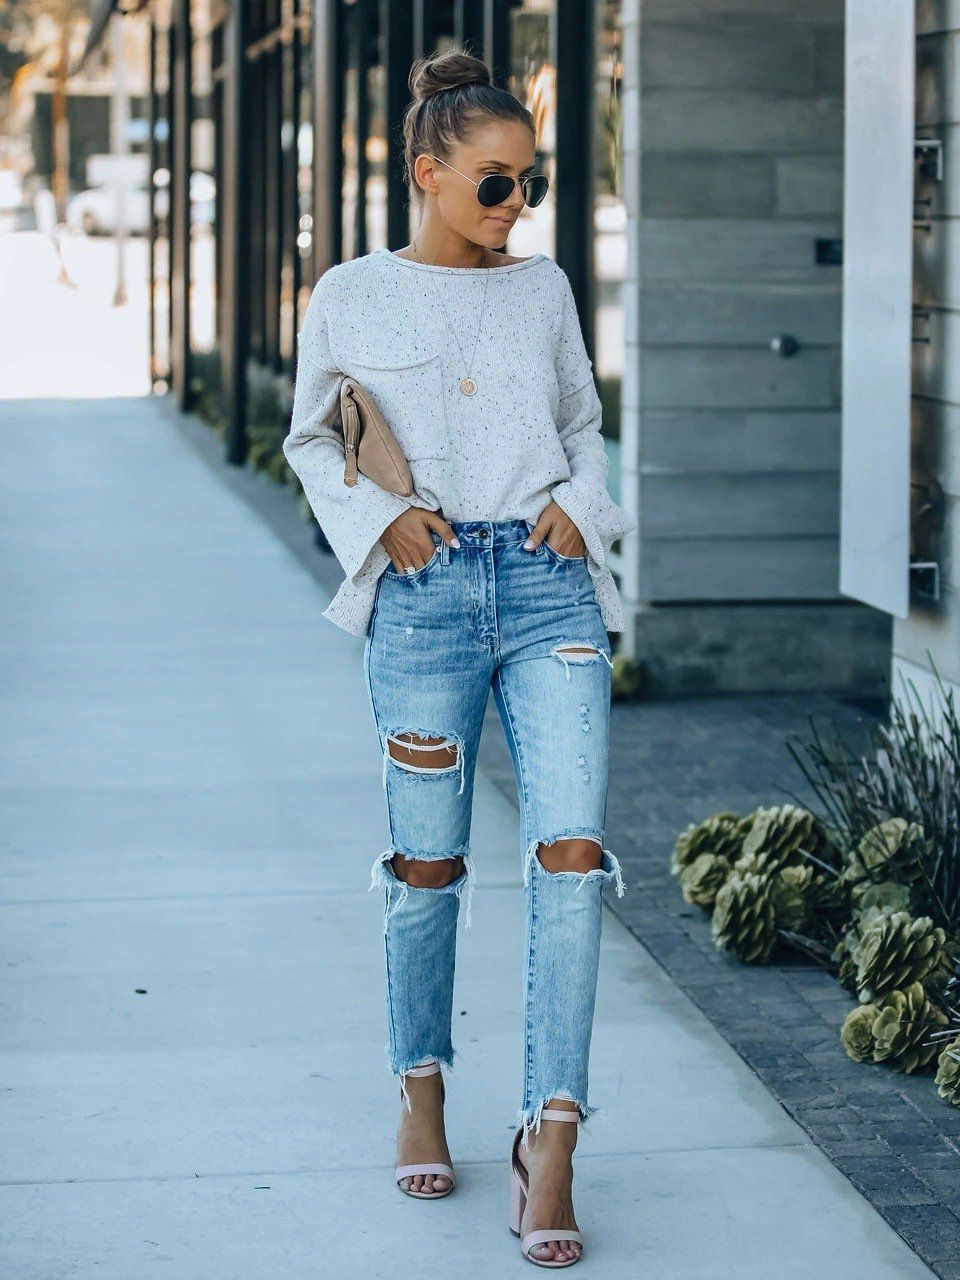 Are Jeans With Holes Still In Trend And How To Care 2022